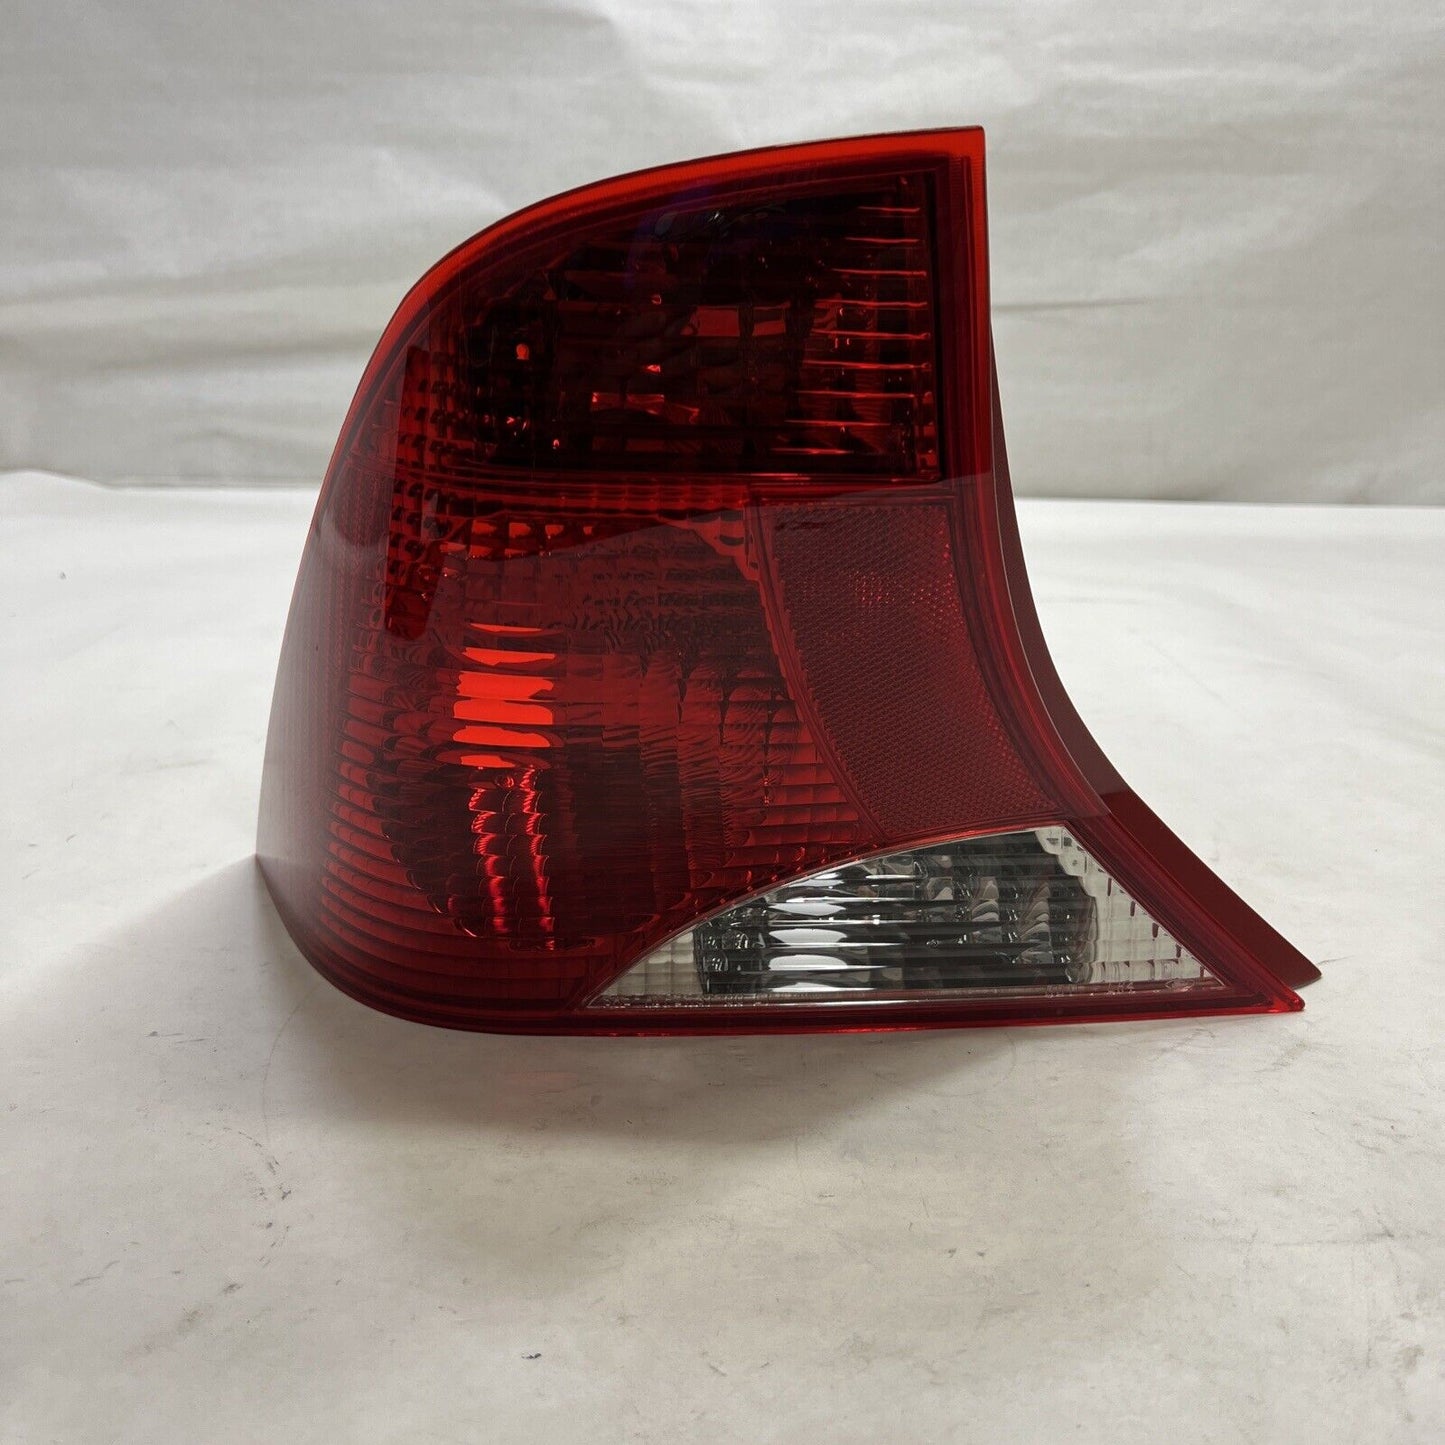 New OEM Ford 2001-02 Focus-Taillight Tail Light Lamp Driver Side 1S4Z13405BA